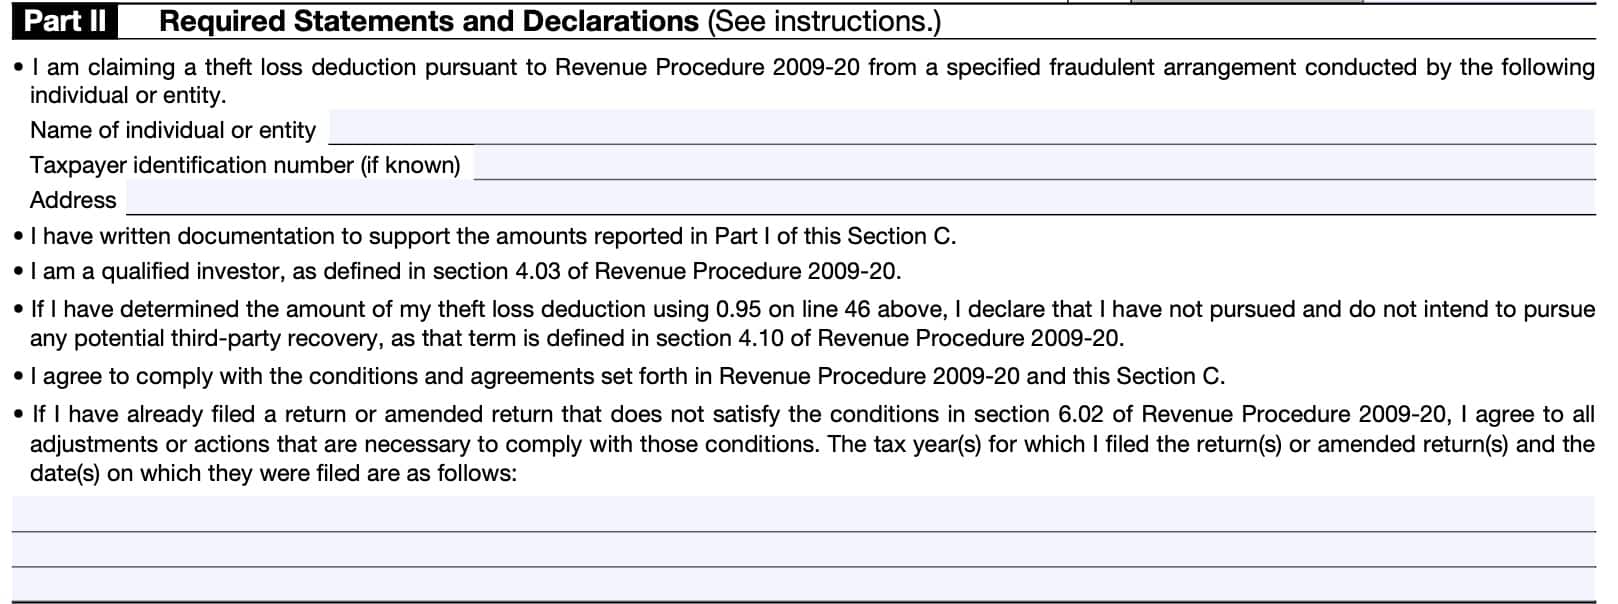 section c, part ii: required statements and declarations